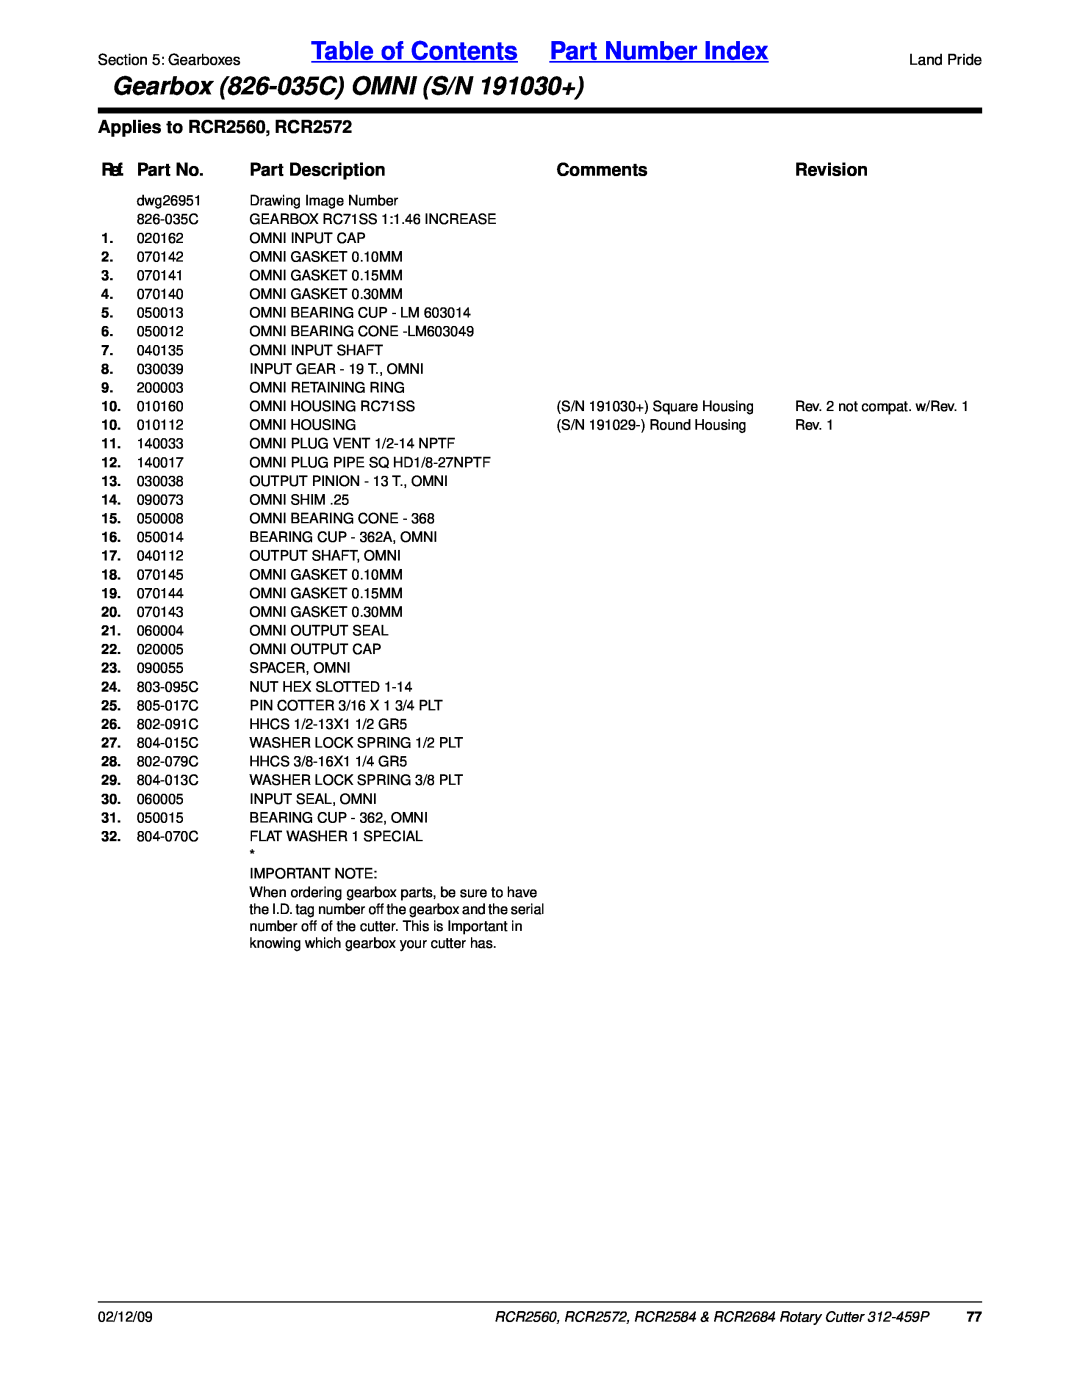 Land Pride RCR2584 Table of Contents Part Number Index, Gearbox 826-035COMNI S/N 191030+, Applies to RCR2560, RCR2572 